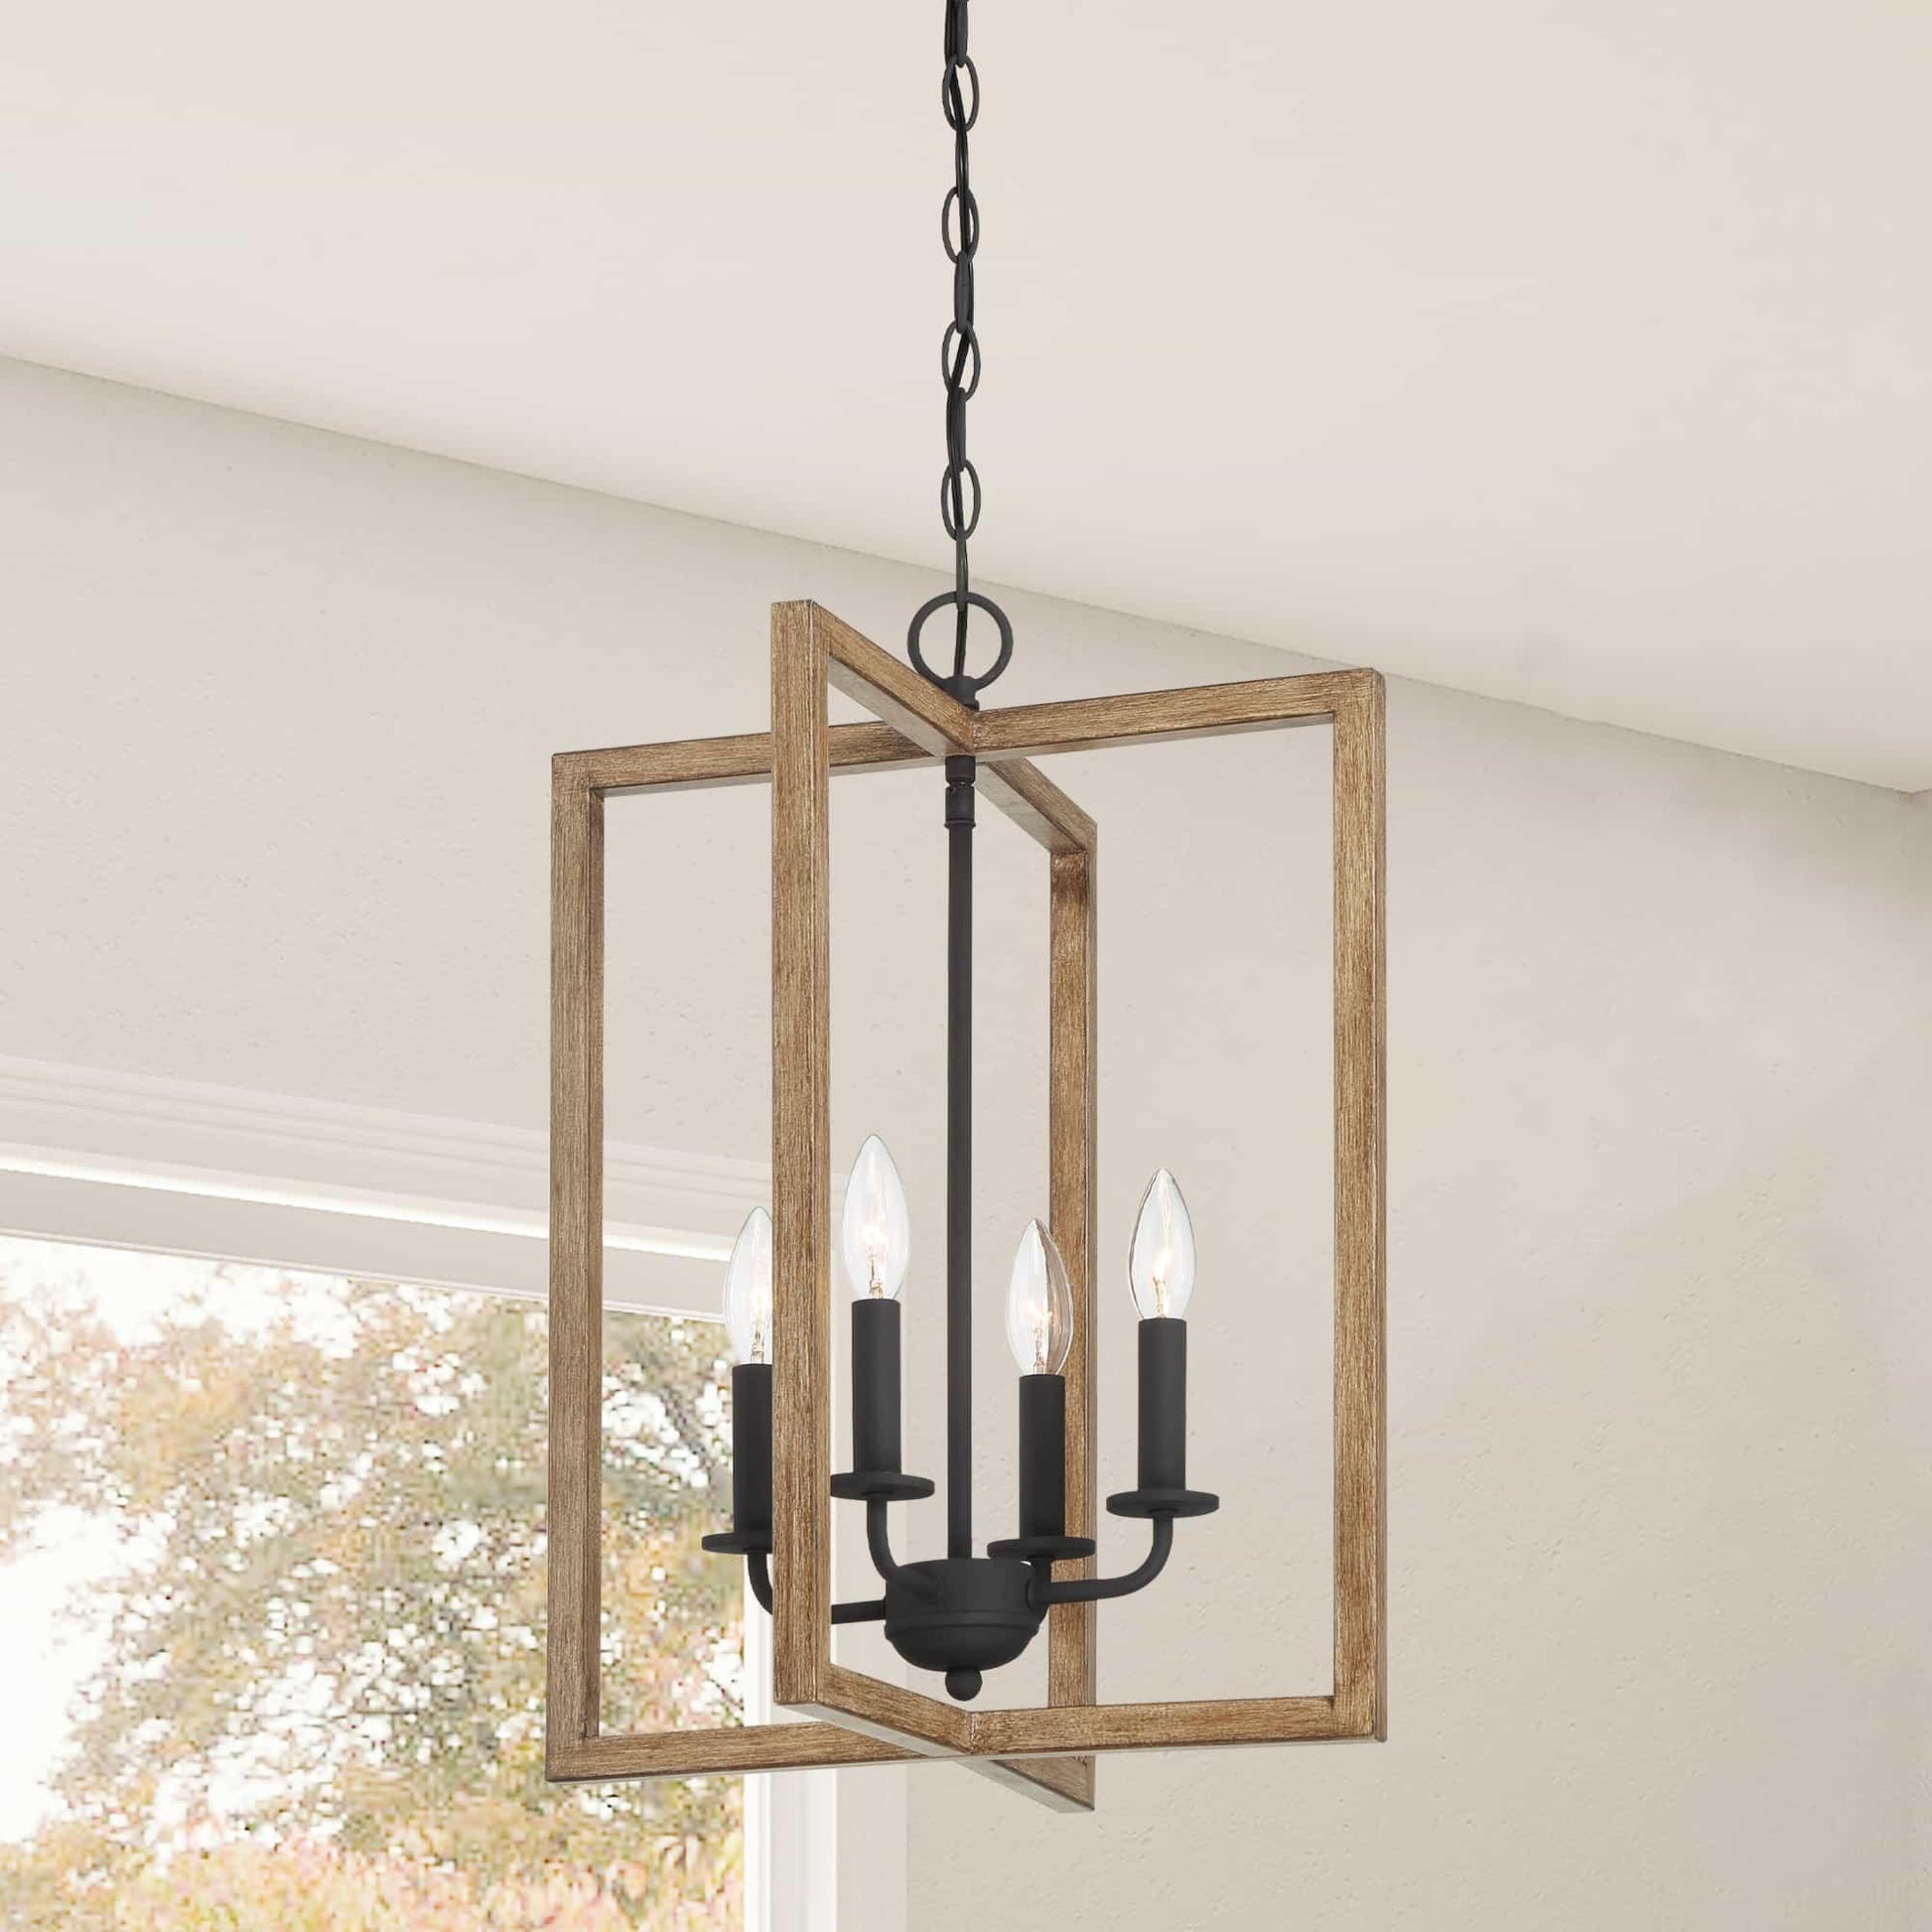 4 light candle style square chandelier (1) by ACROMA